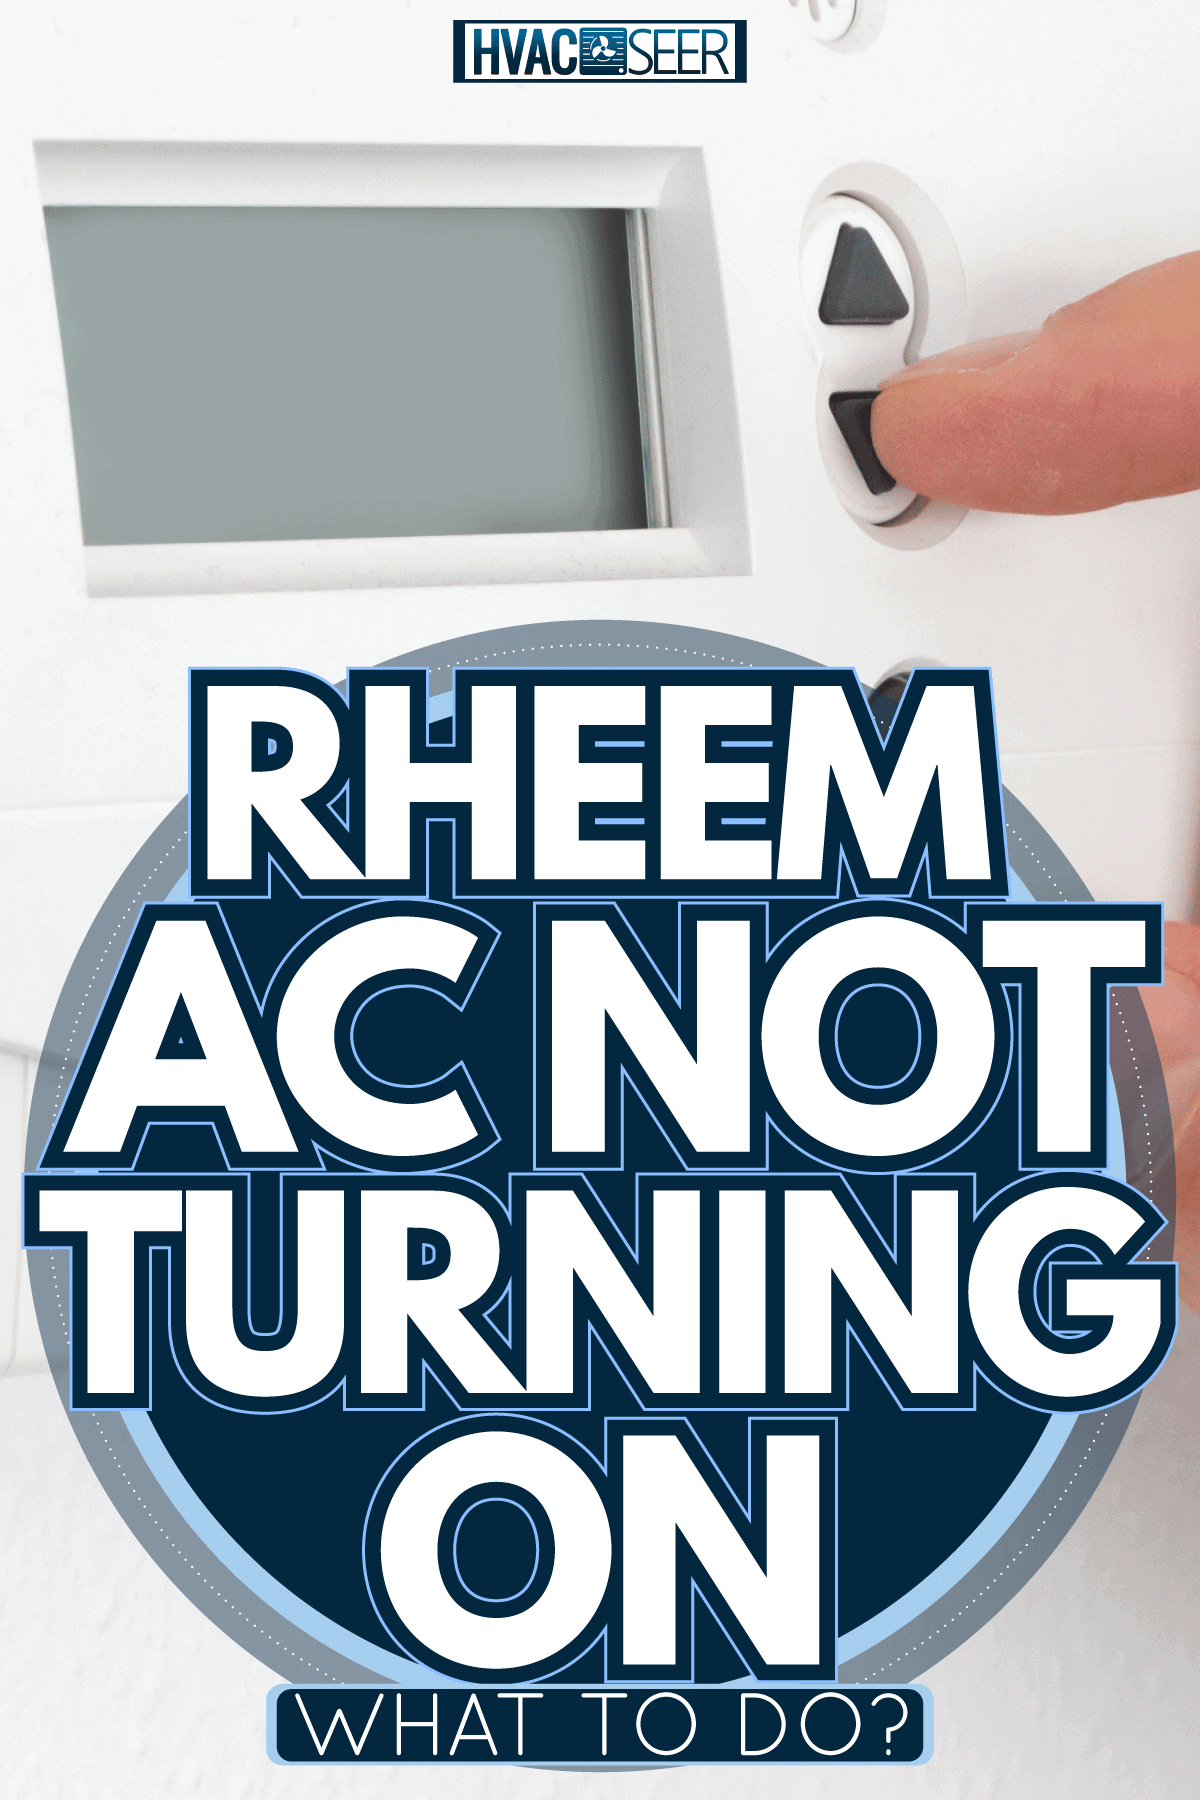 Vintage digital thermostat trouble ac is not turning on, Rheem Ac Not Turning On What to do?